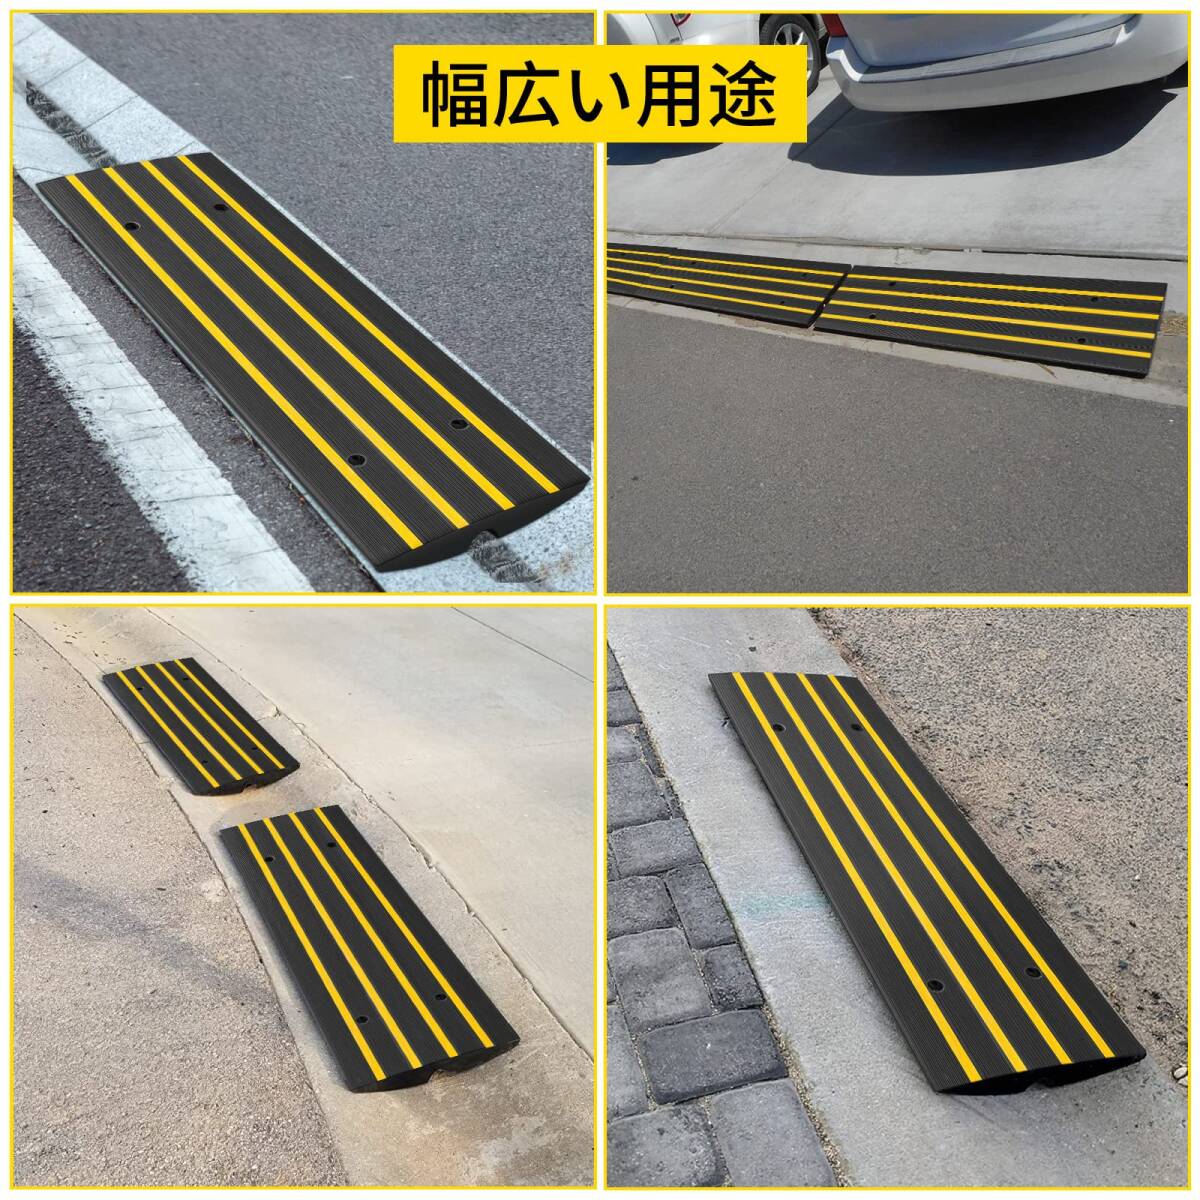  new goods * cable protector floor cable cover withstand load 10 ton rubber code protector electric wire cable cover cable protection parking place 